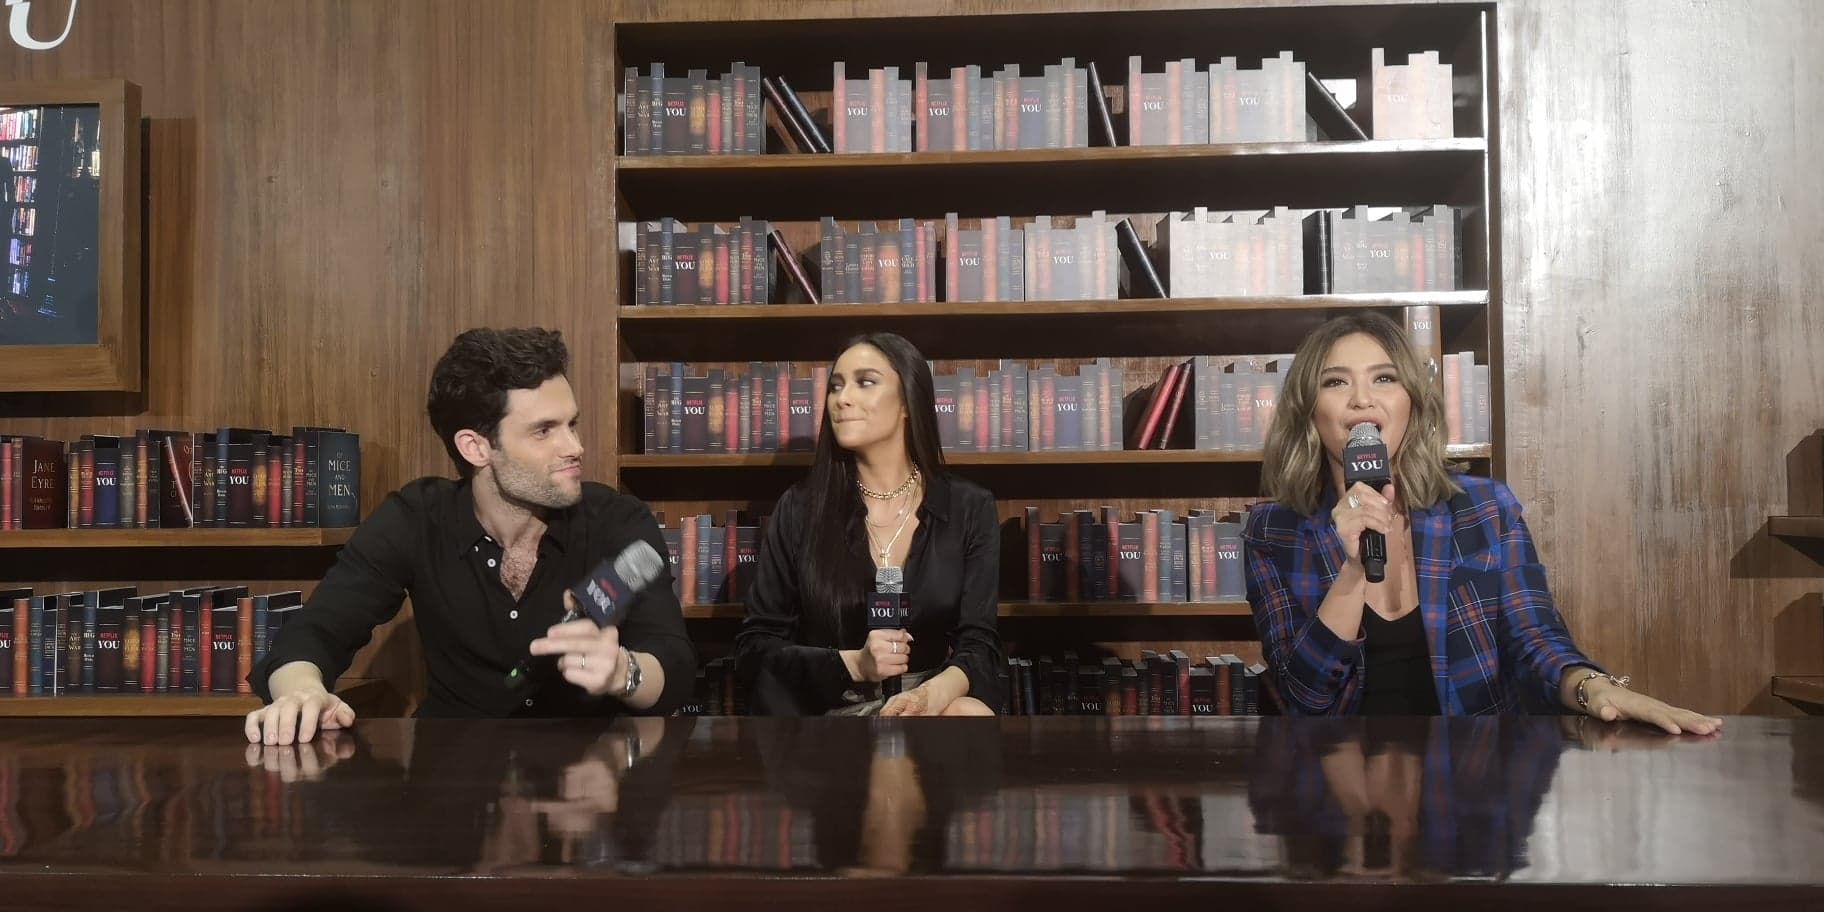 Joe (still) a psychopath, Penn Badgley has a sweet tooth and Shay Mitchell is perfect during ‘You’ meet and greet in the Philippines